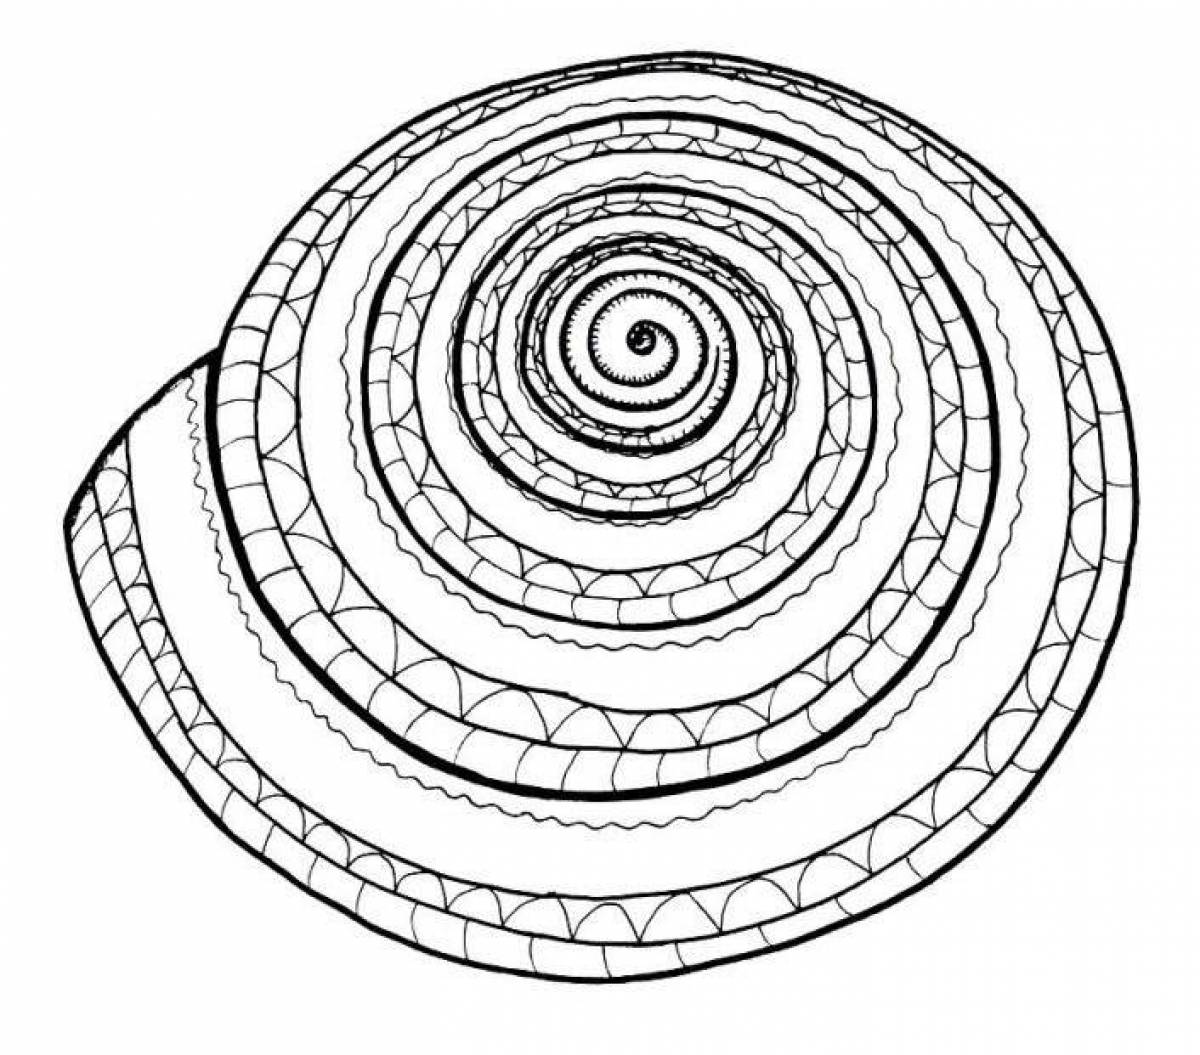 Coloring book exquisite spiral pattern